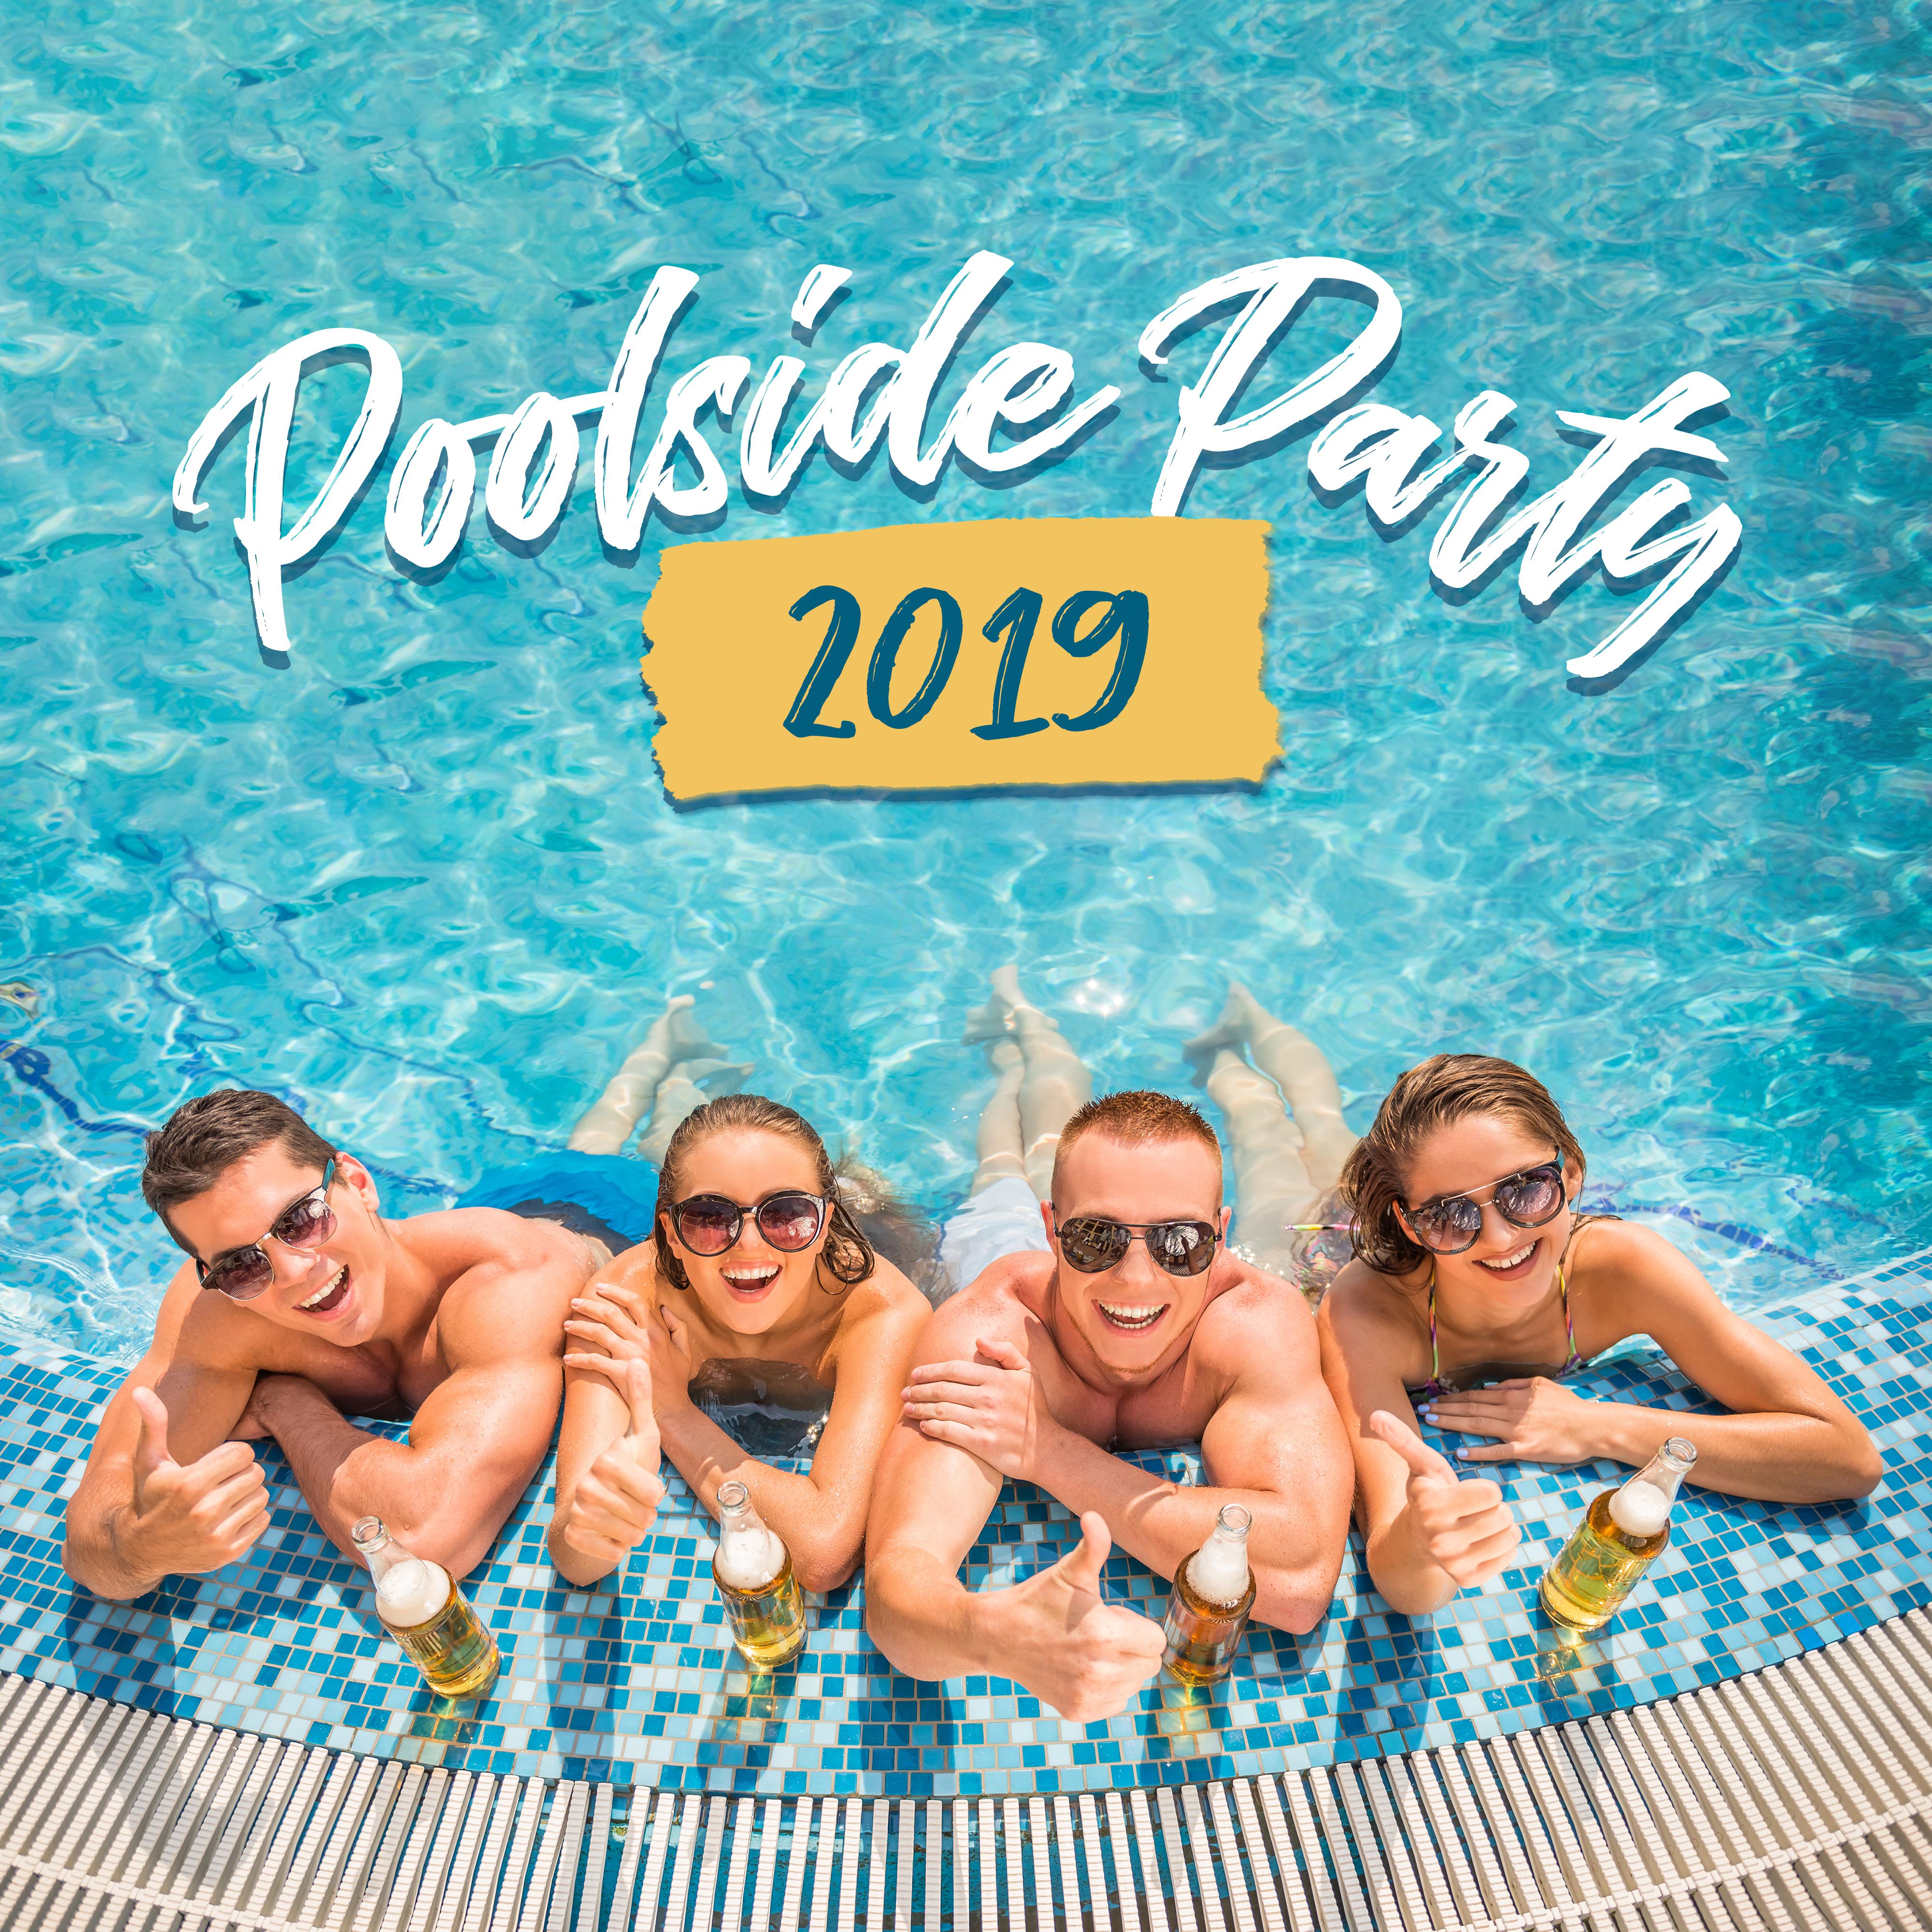 Poolside Party 2019